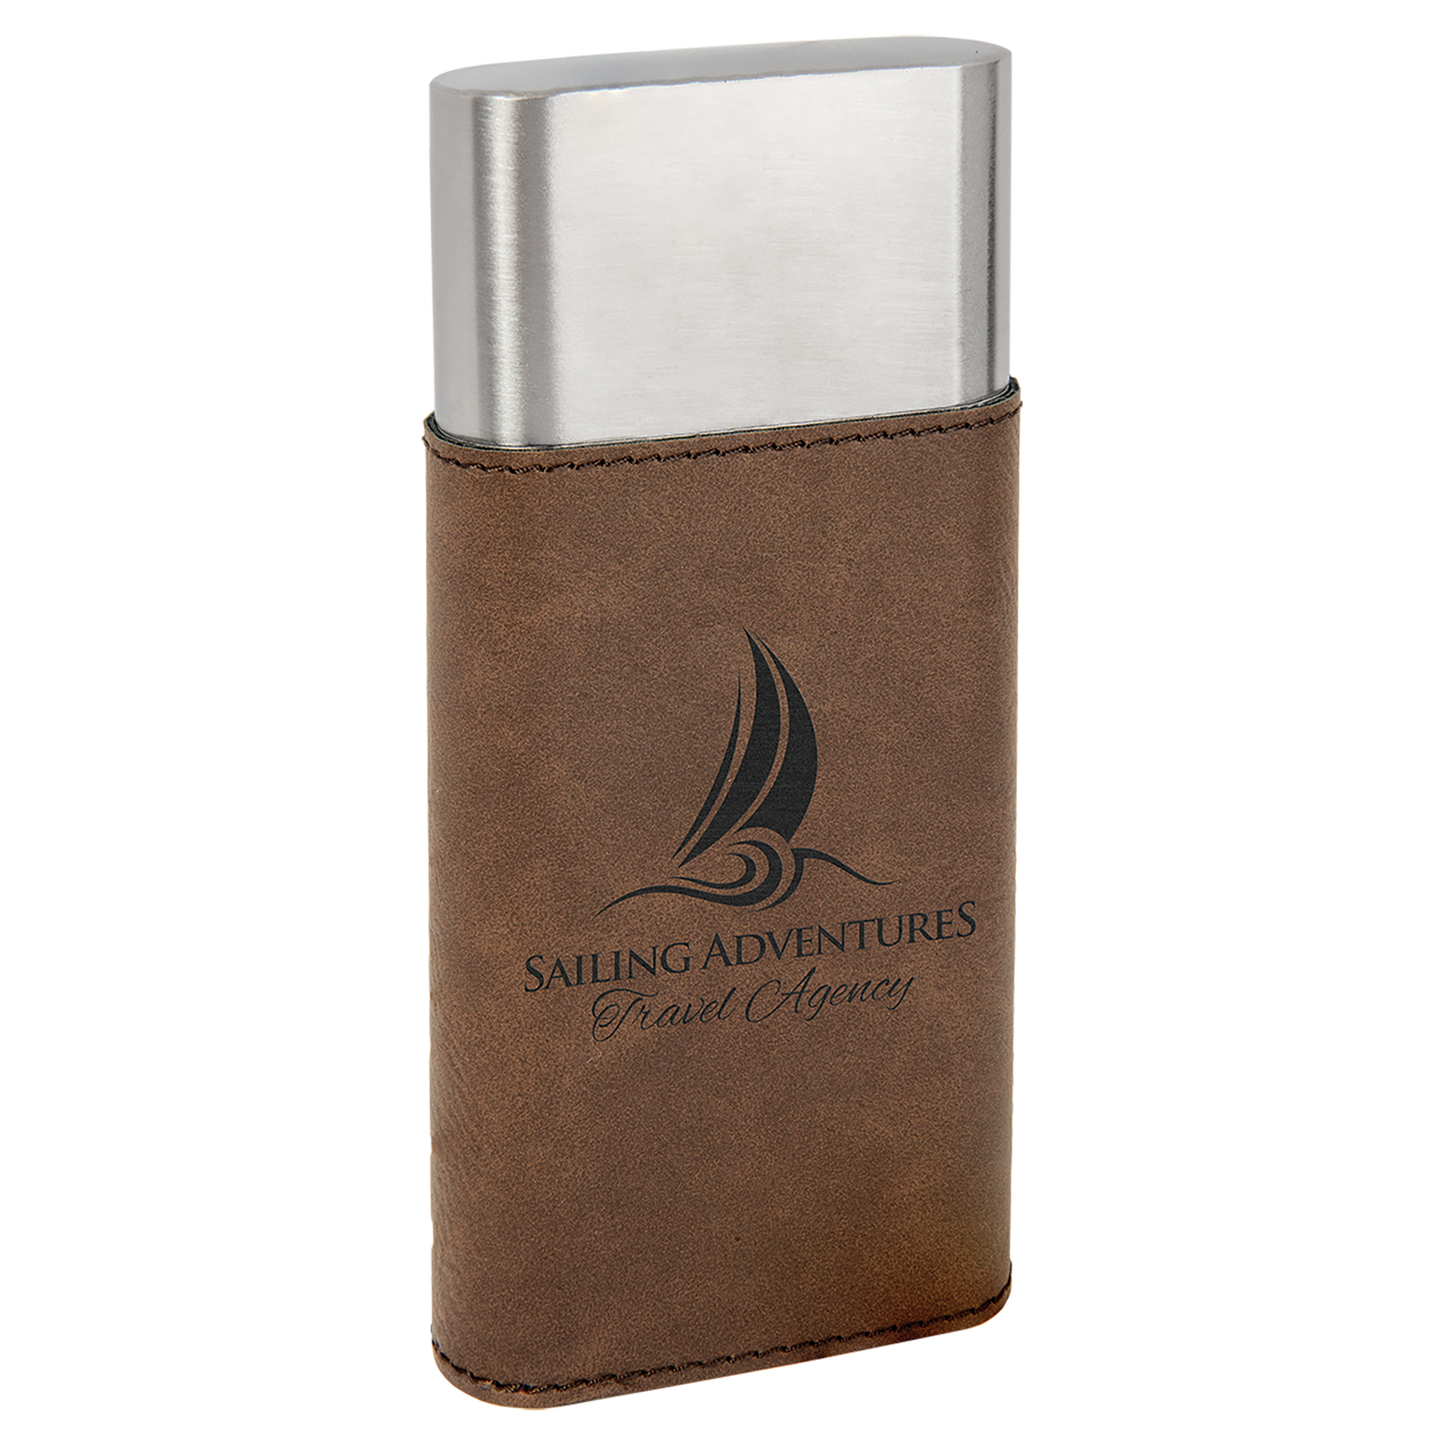 Leatherette Cigar Case with Cutter